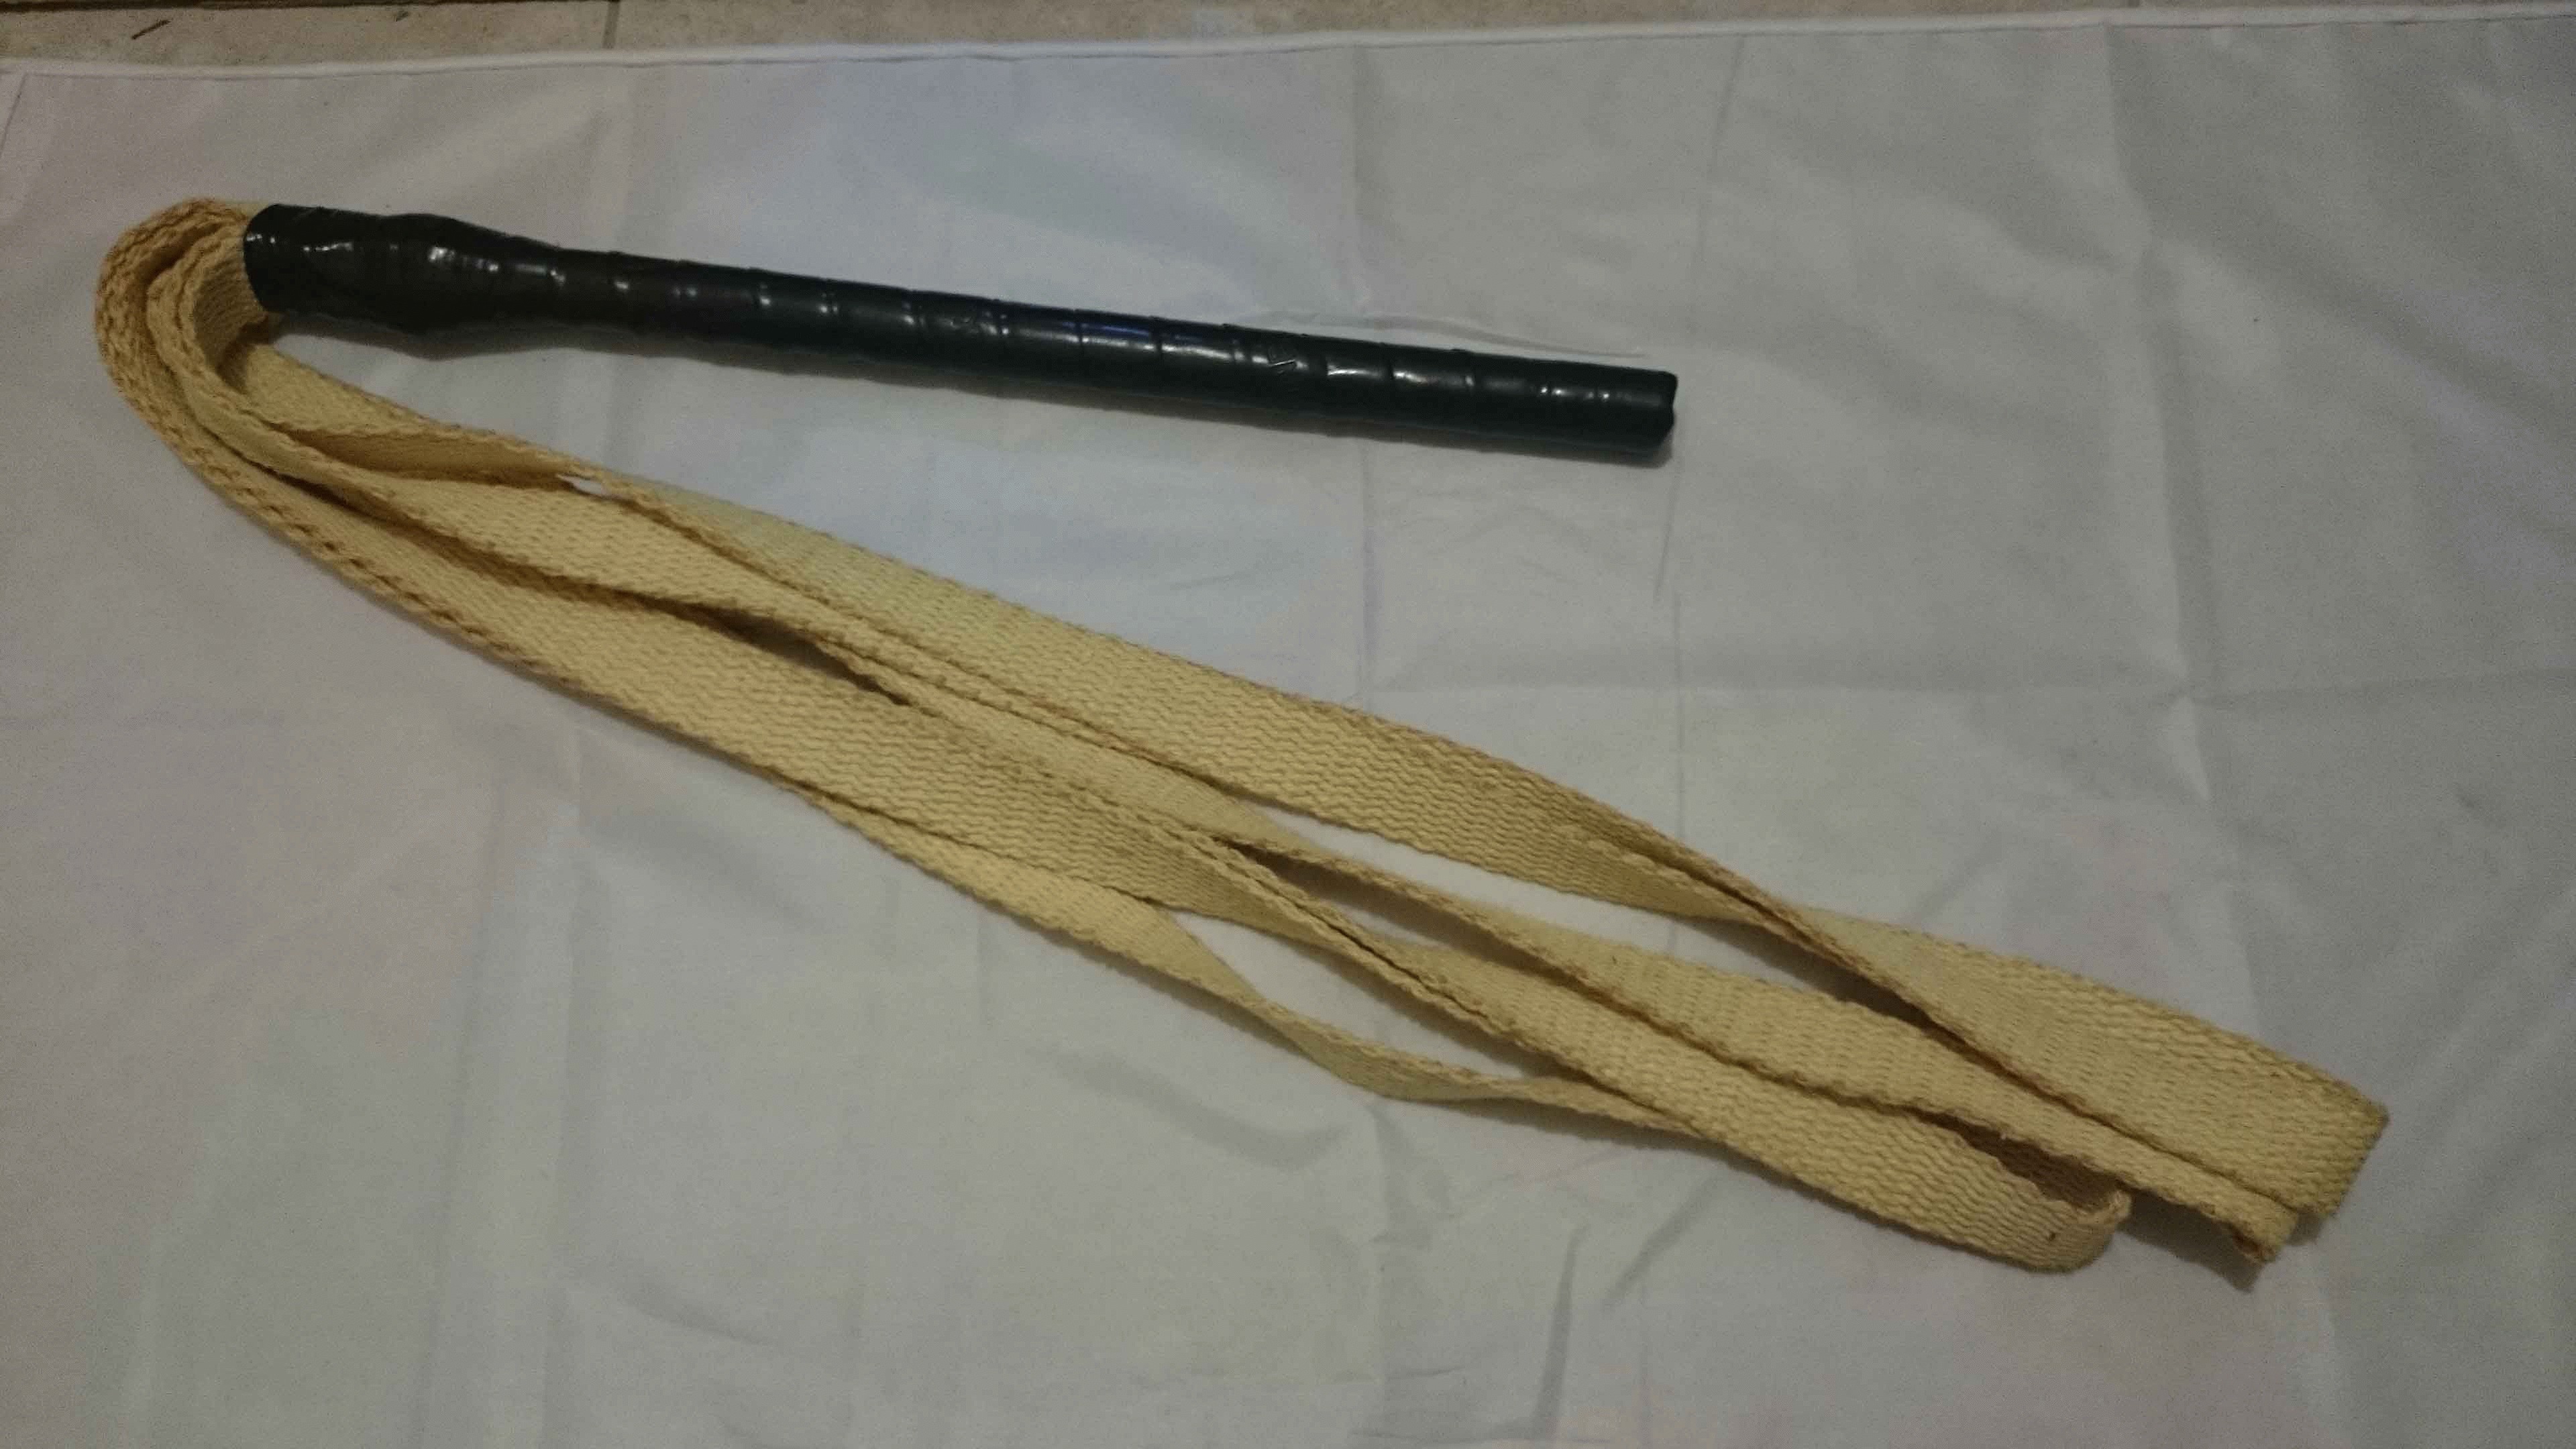 Fire flogger - 3 x 25mm double-sided kevlar falls - PU leather grip